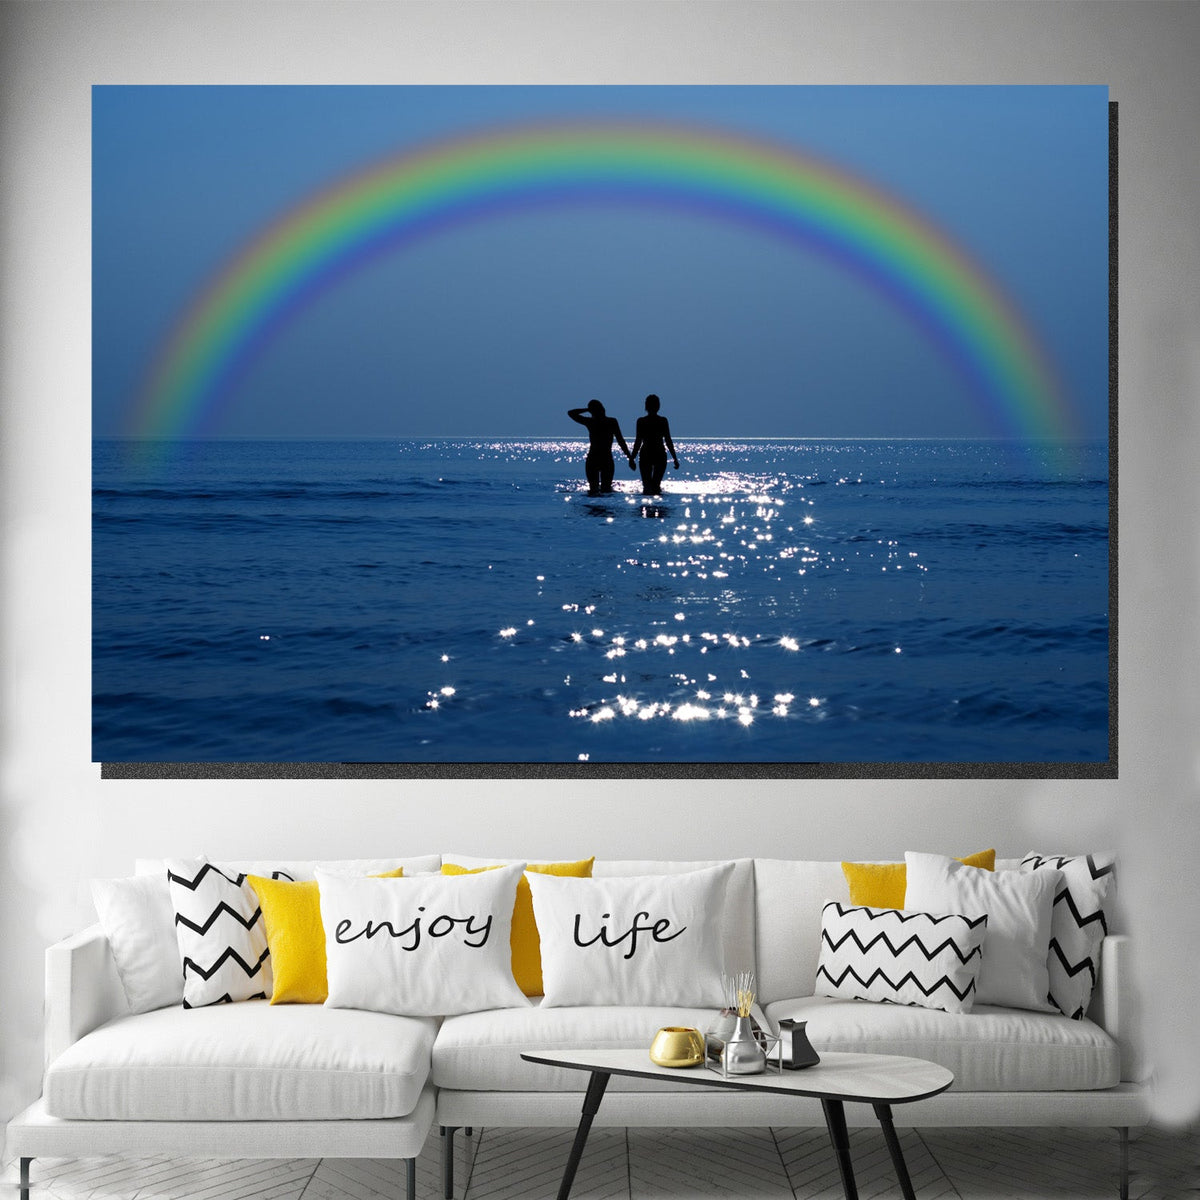 https://cdn.shopify.com/s/files/1/0387/9986/8044/products/LoveIsaRainbowCanvasArtprintStretched-3.jpg